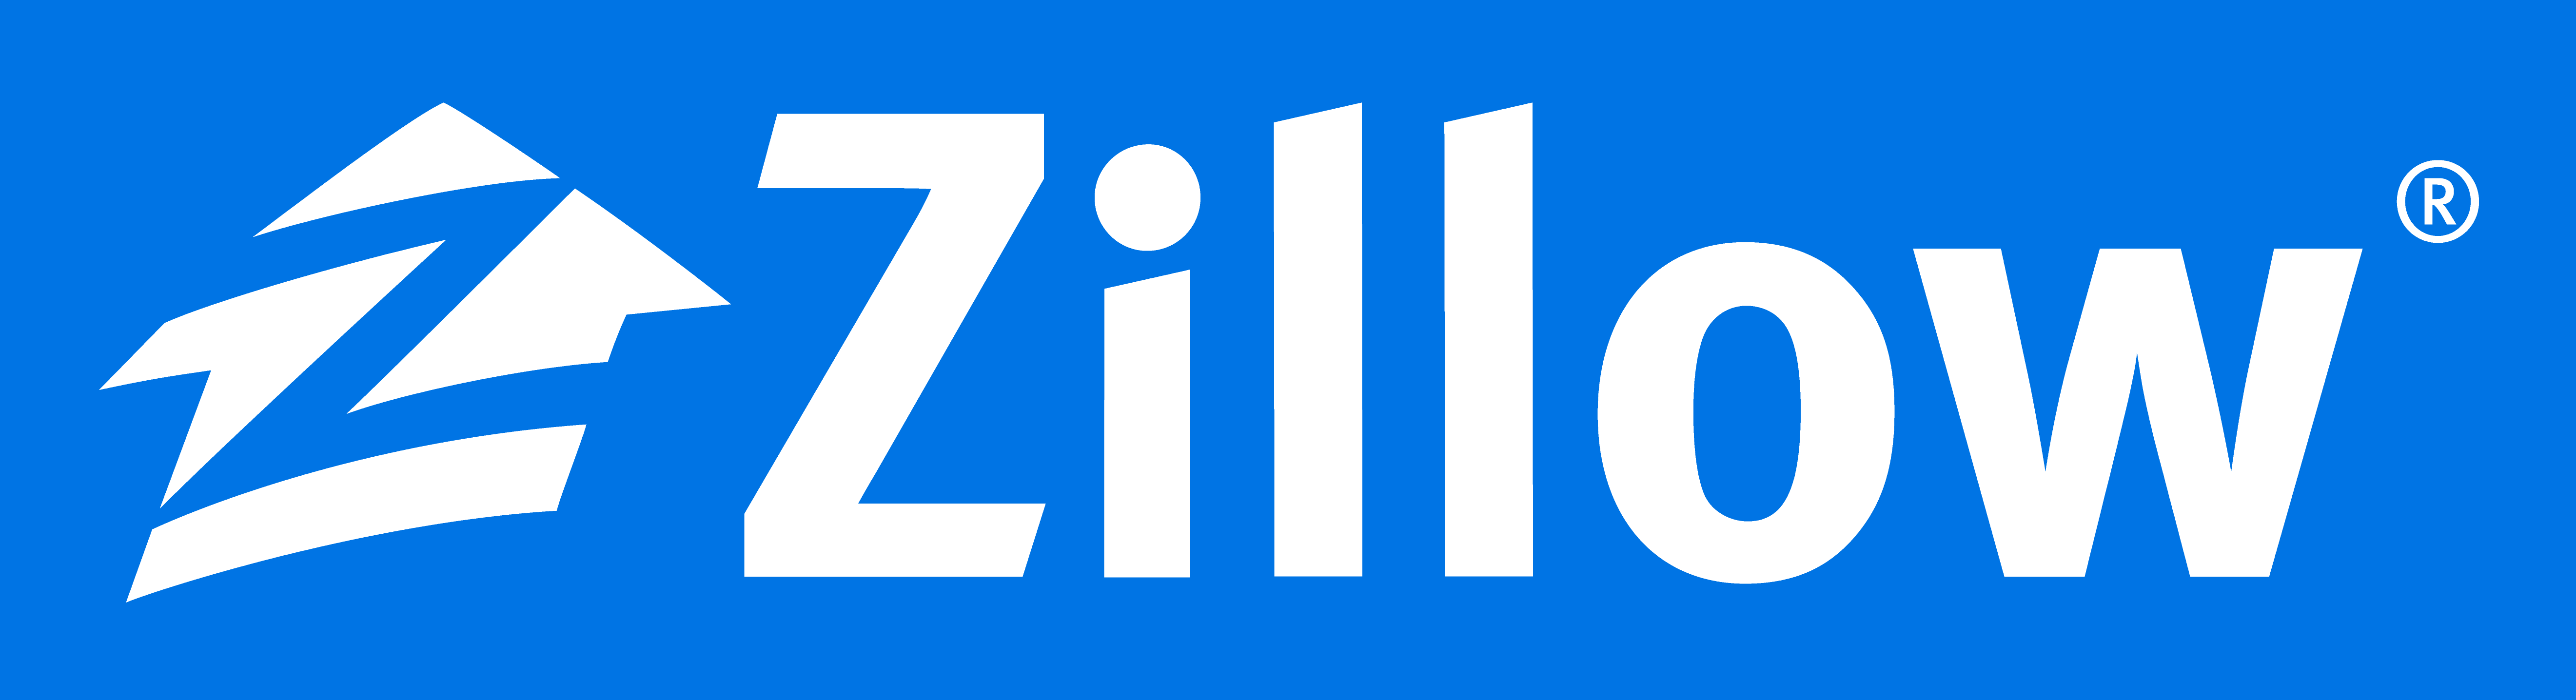 Blue and white Zillow Logo